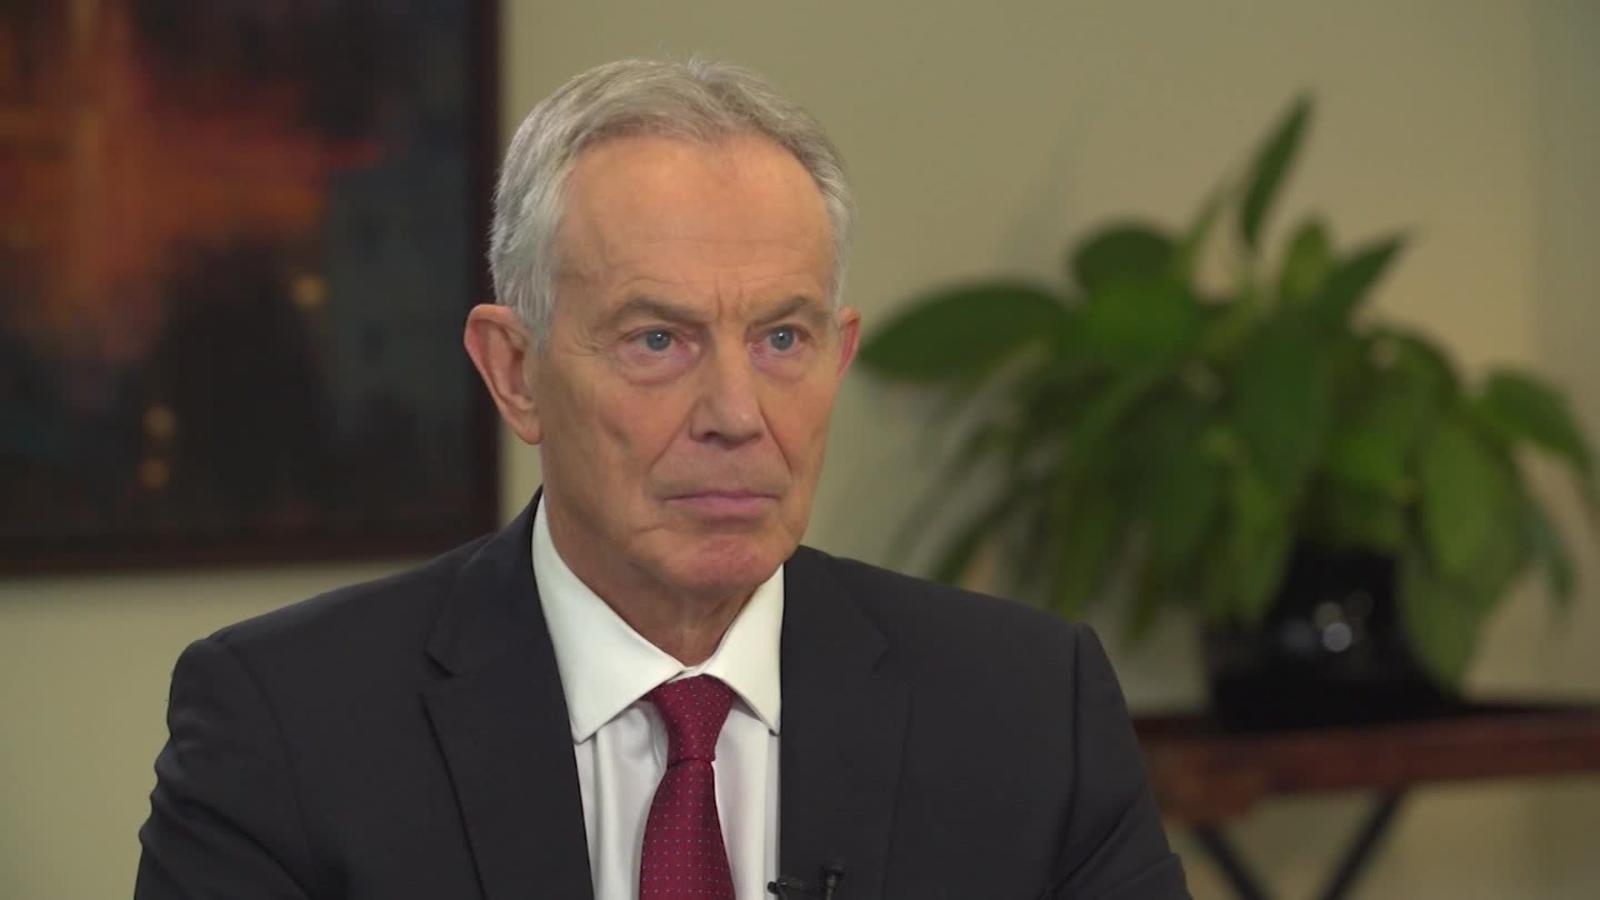 COVID-19 is a ‘wake-up command’ to address Africa’s challenges - Tony Blair